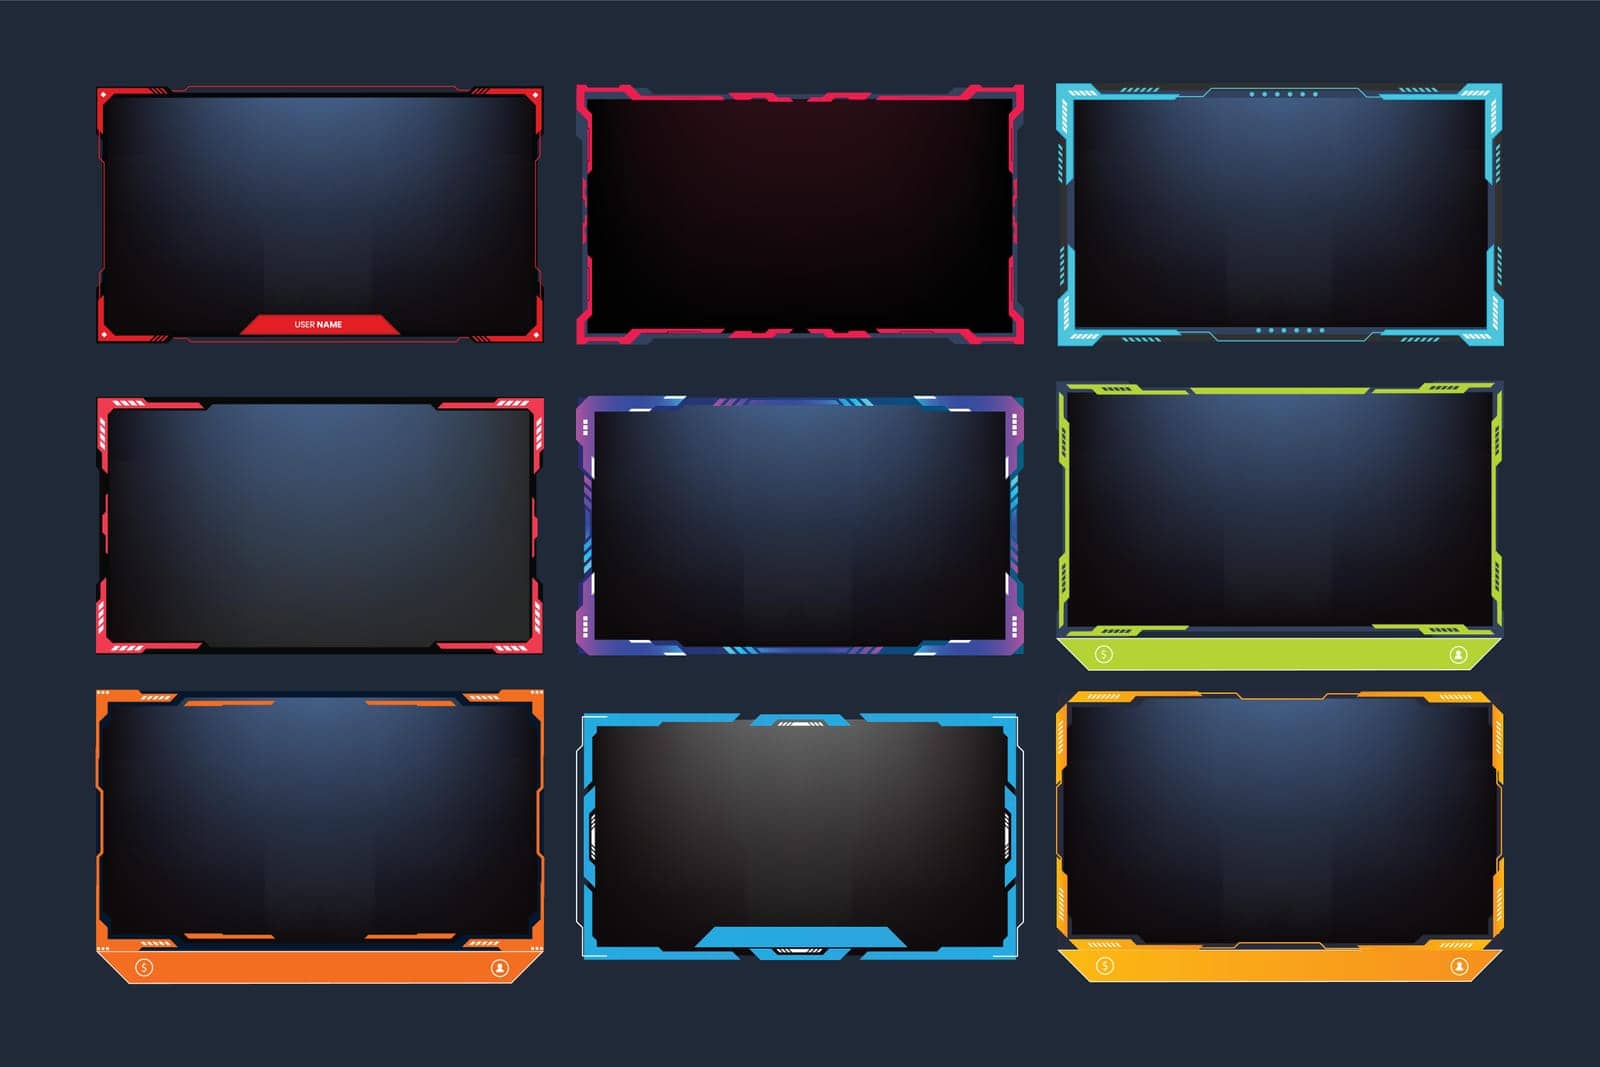 Futuristic stream overlay set vector. Broadcast screen interface bundle design for live streaming screens. Online gaming overlay vector collection with yellow, red, and blue colors on dark background.